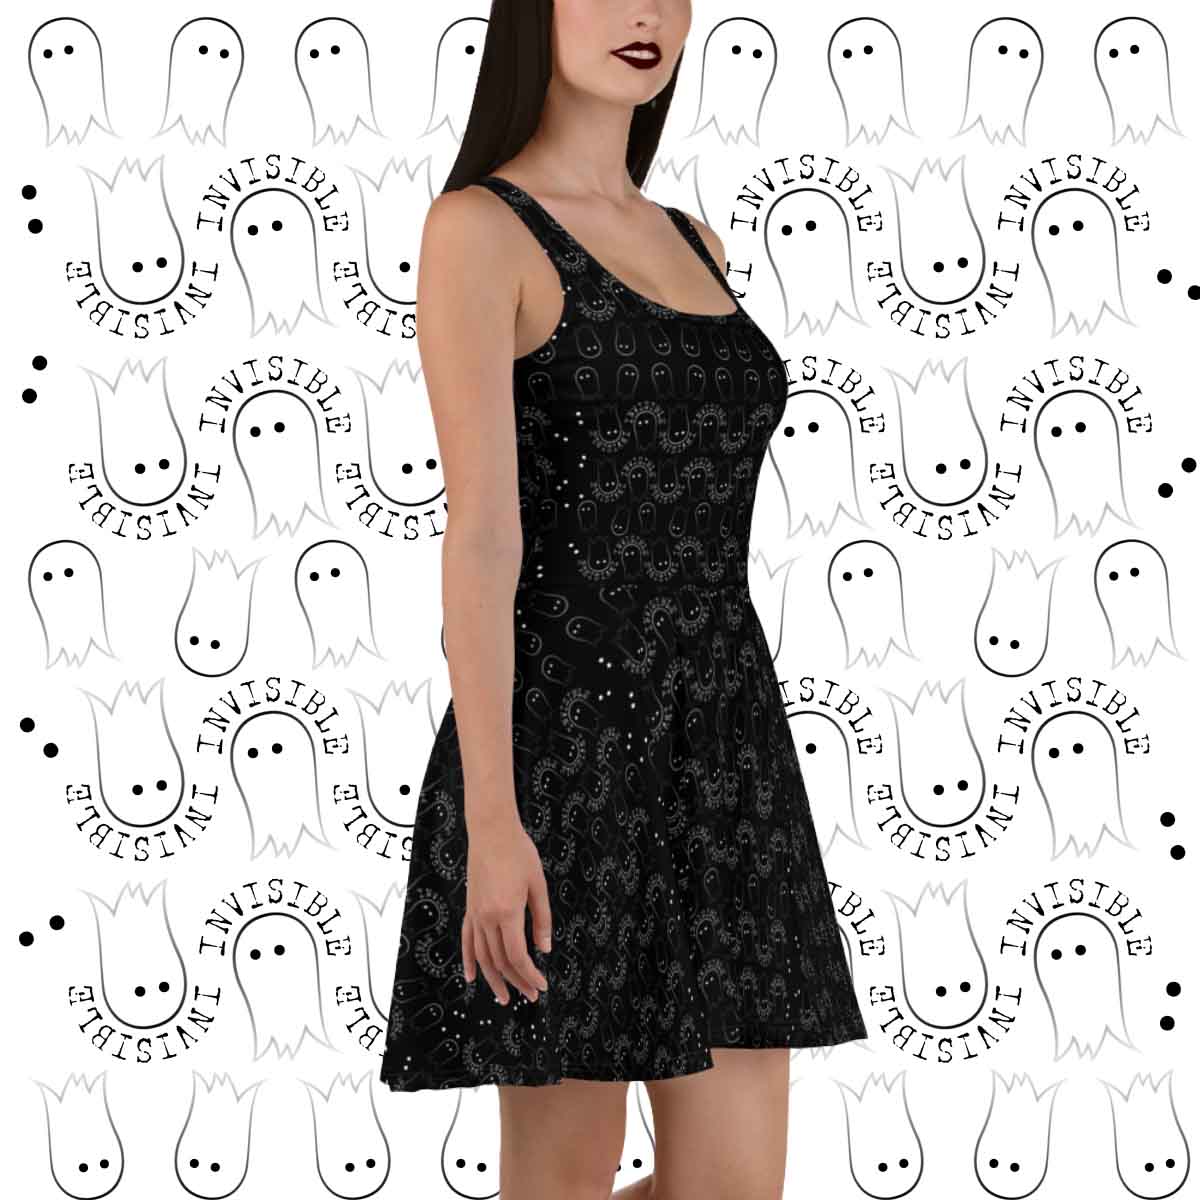 goth; cute; little black dress; witch; ghost hunter; teen; cute; shy; paranormal; casual